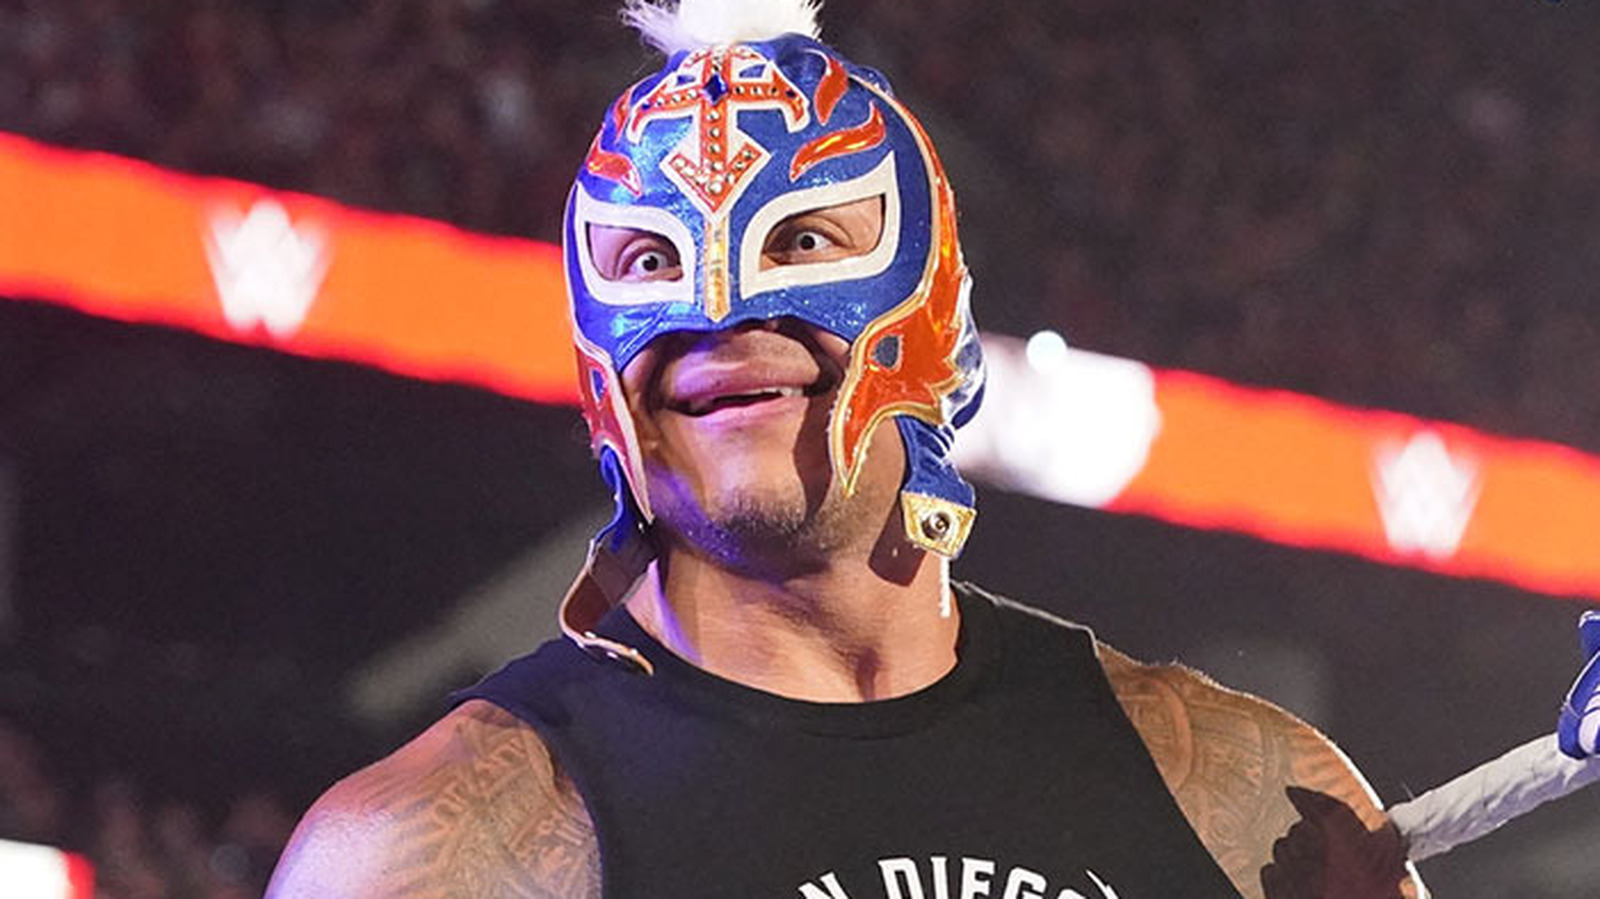 Mike Chioda Celebrates Rey Mysterio's Career Ahead Of WWE Hall Of Fame Induction